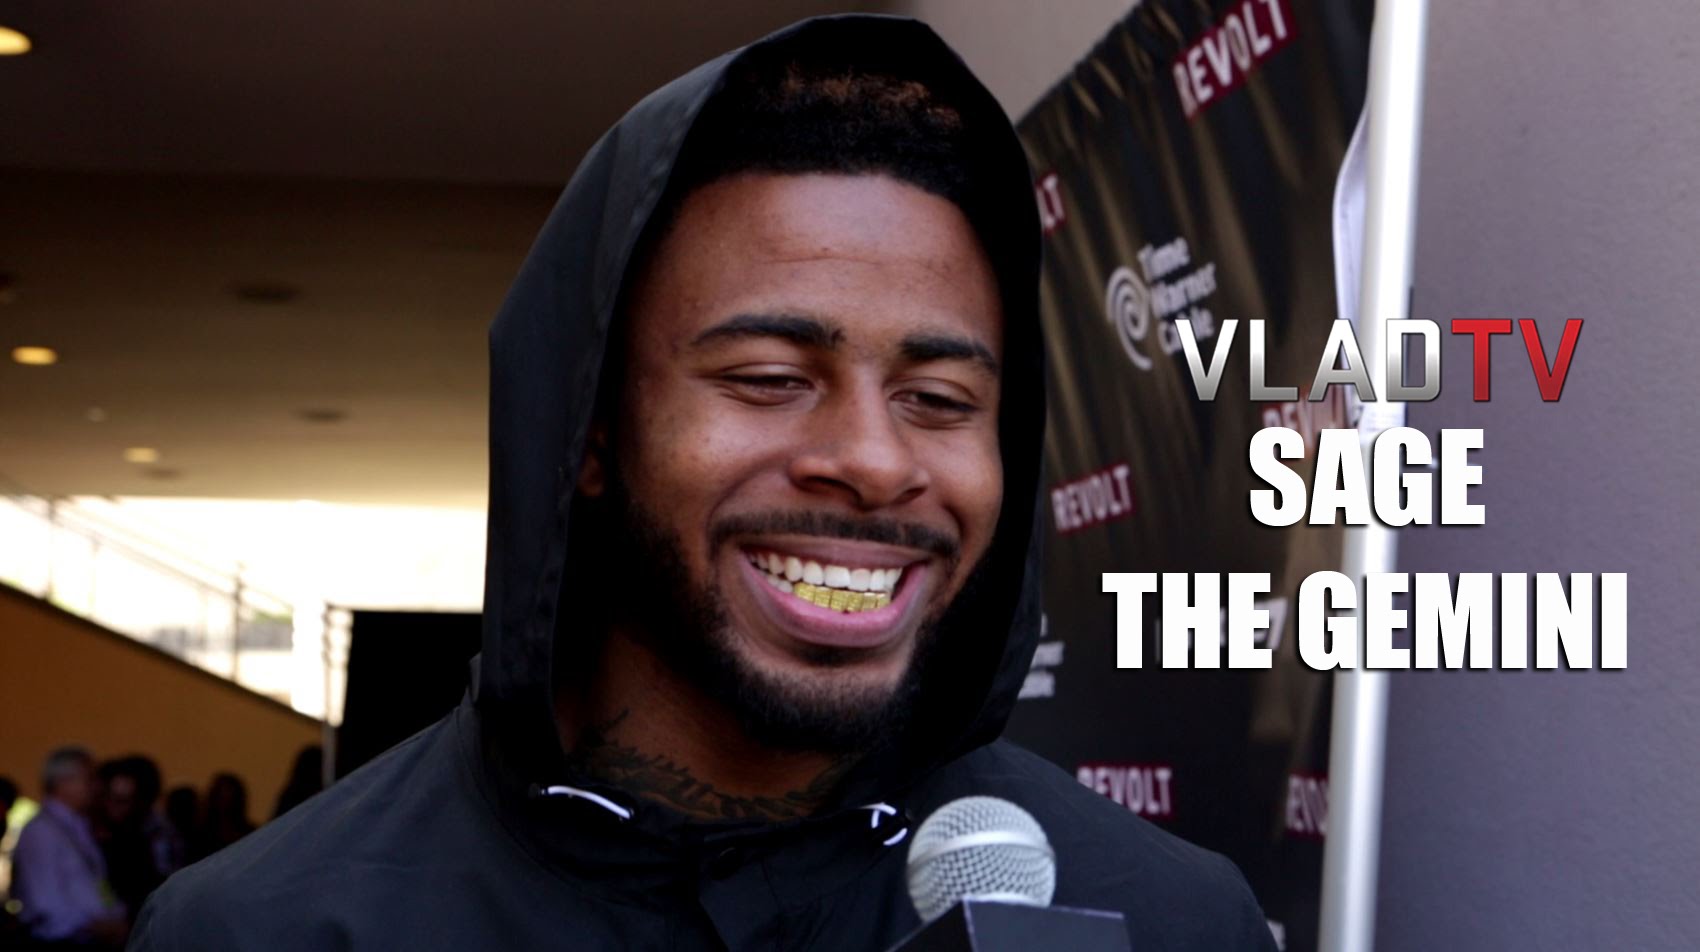 Sage The Gemini: Jordin Sparks & I Are Just Cool Friends.